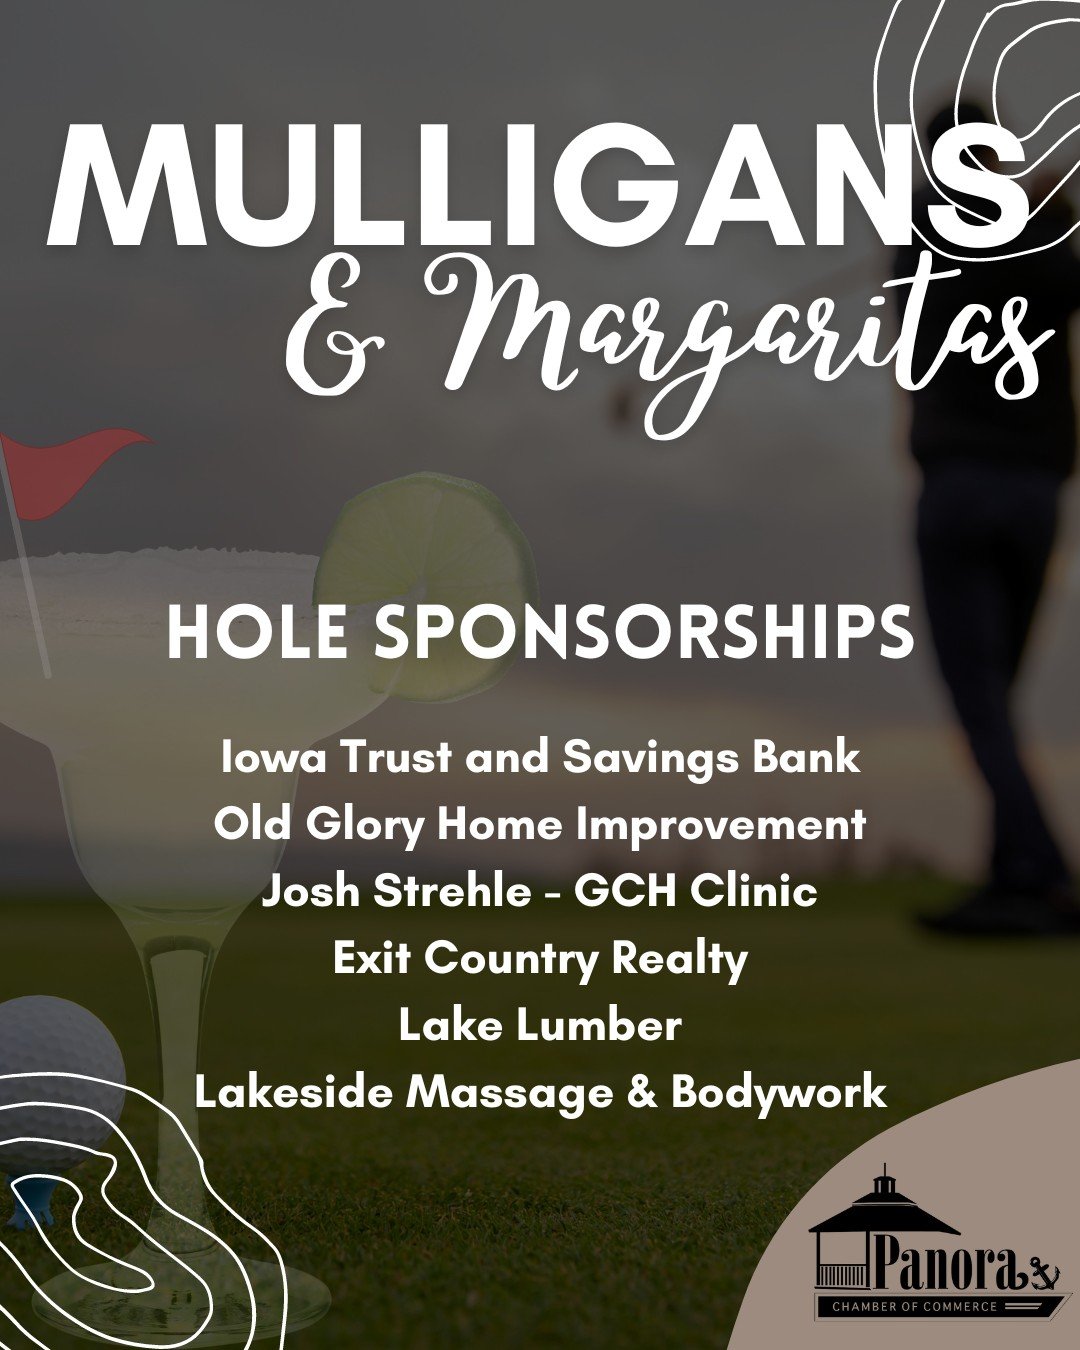 A massive shoutout to our fabulous Hole Sponsors! 

As we gear up for an epic golf tournament, a heartfelt thank you goes out to another group of Mulligan and Margarita Hole Sponsors.

Your contributions have not only brought smiles and fun but have 